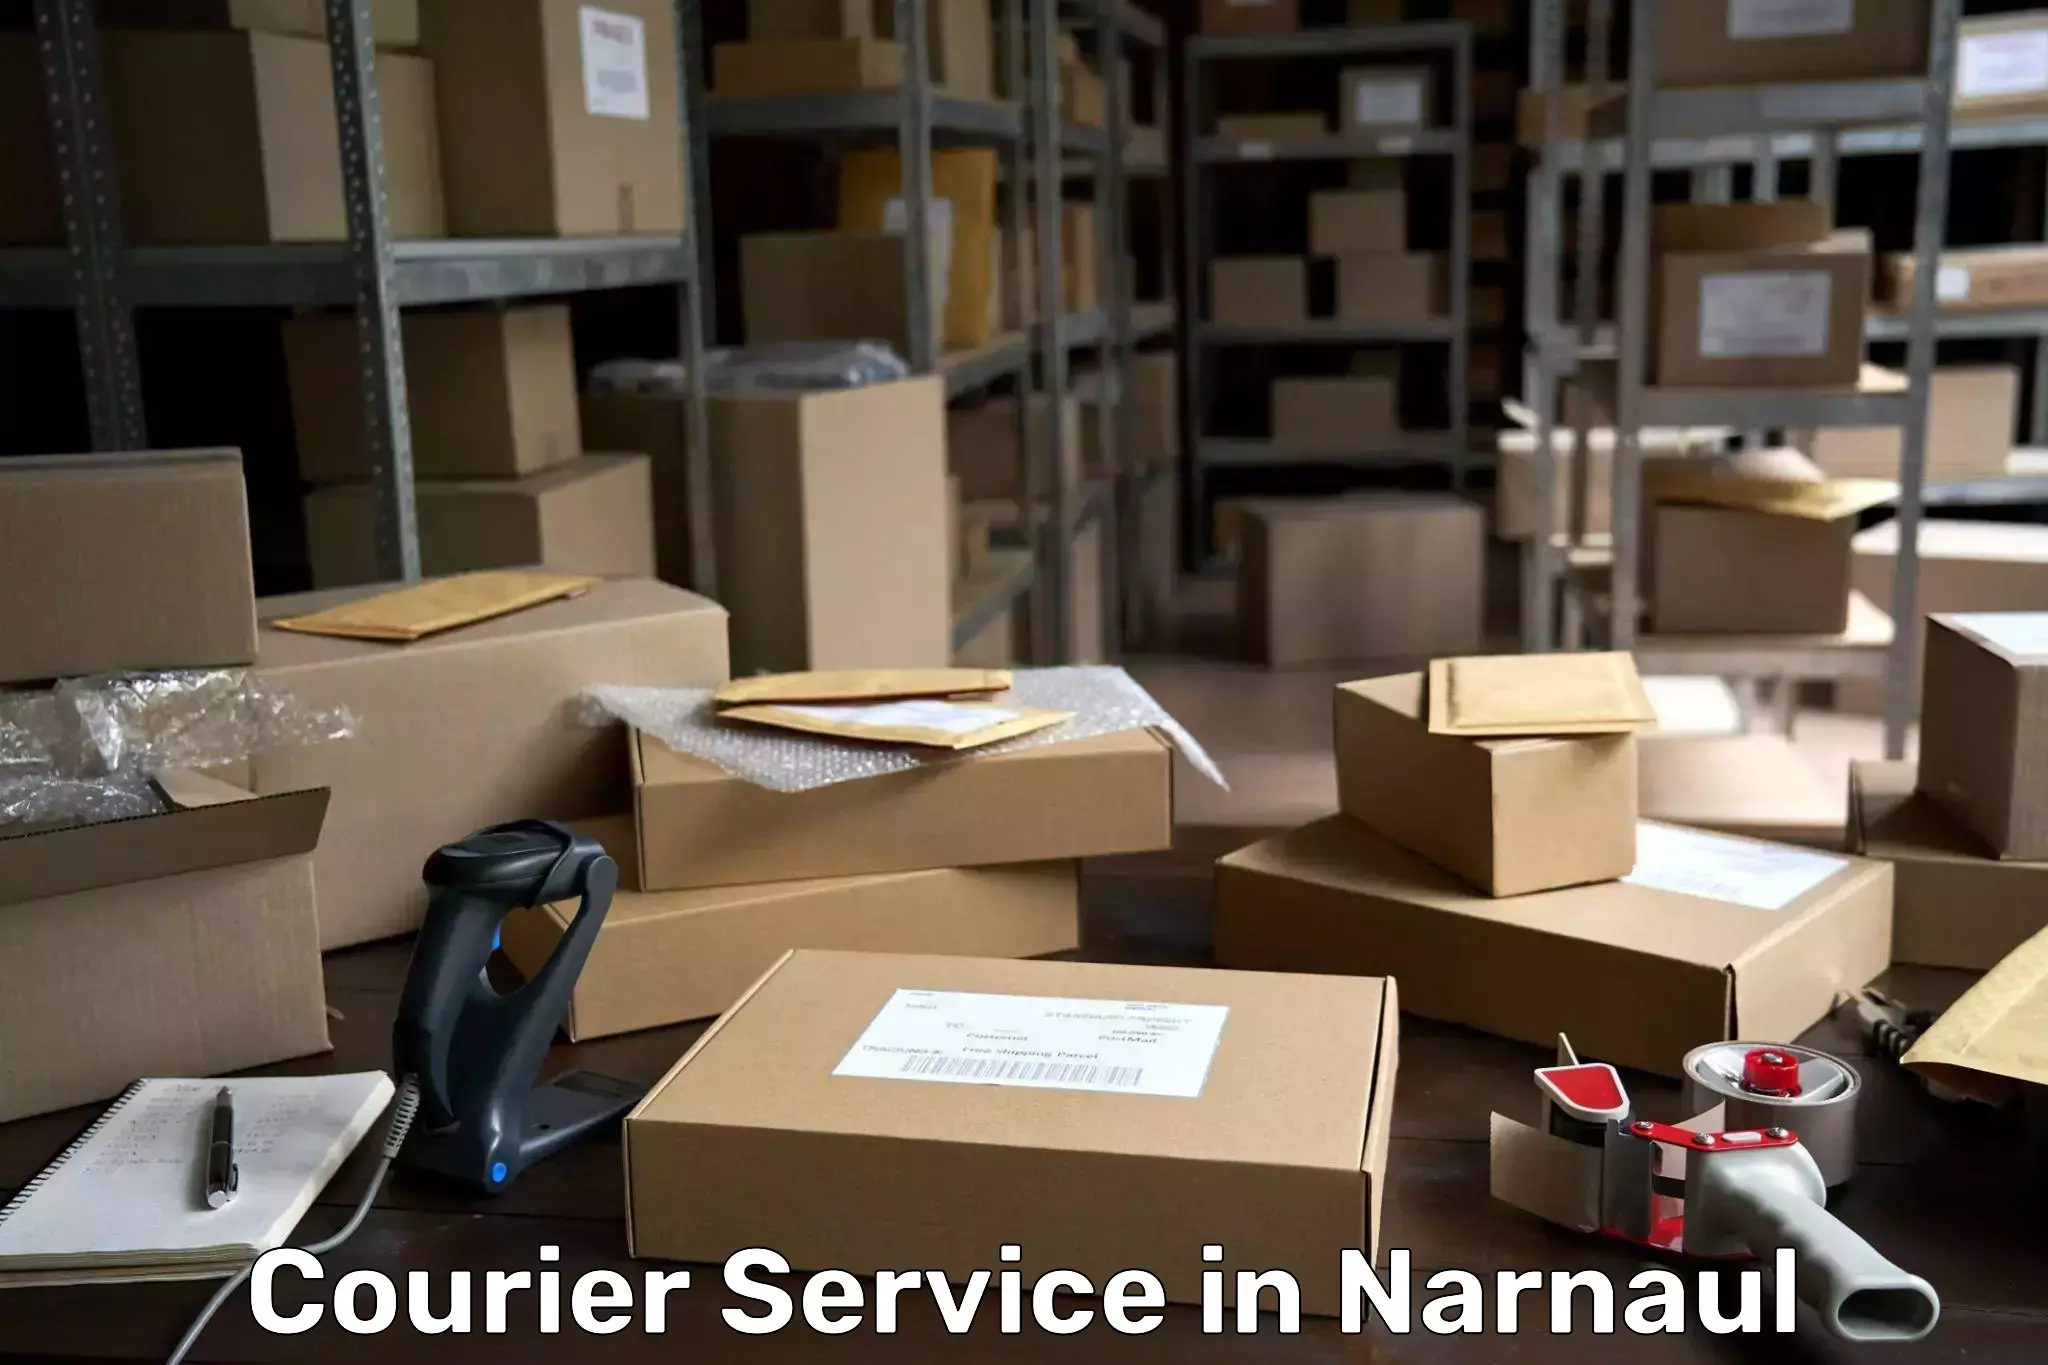 Specialized shipment handling in Narnaul